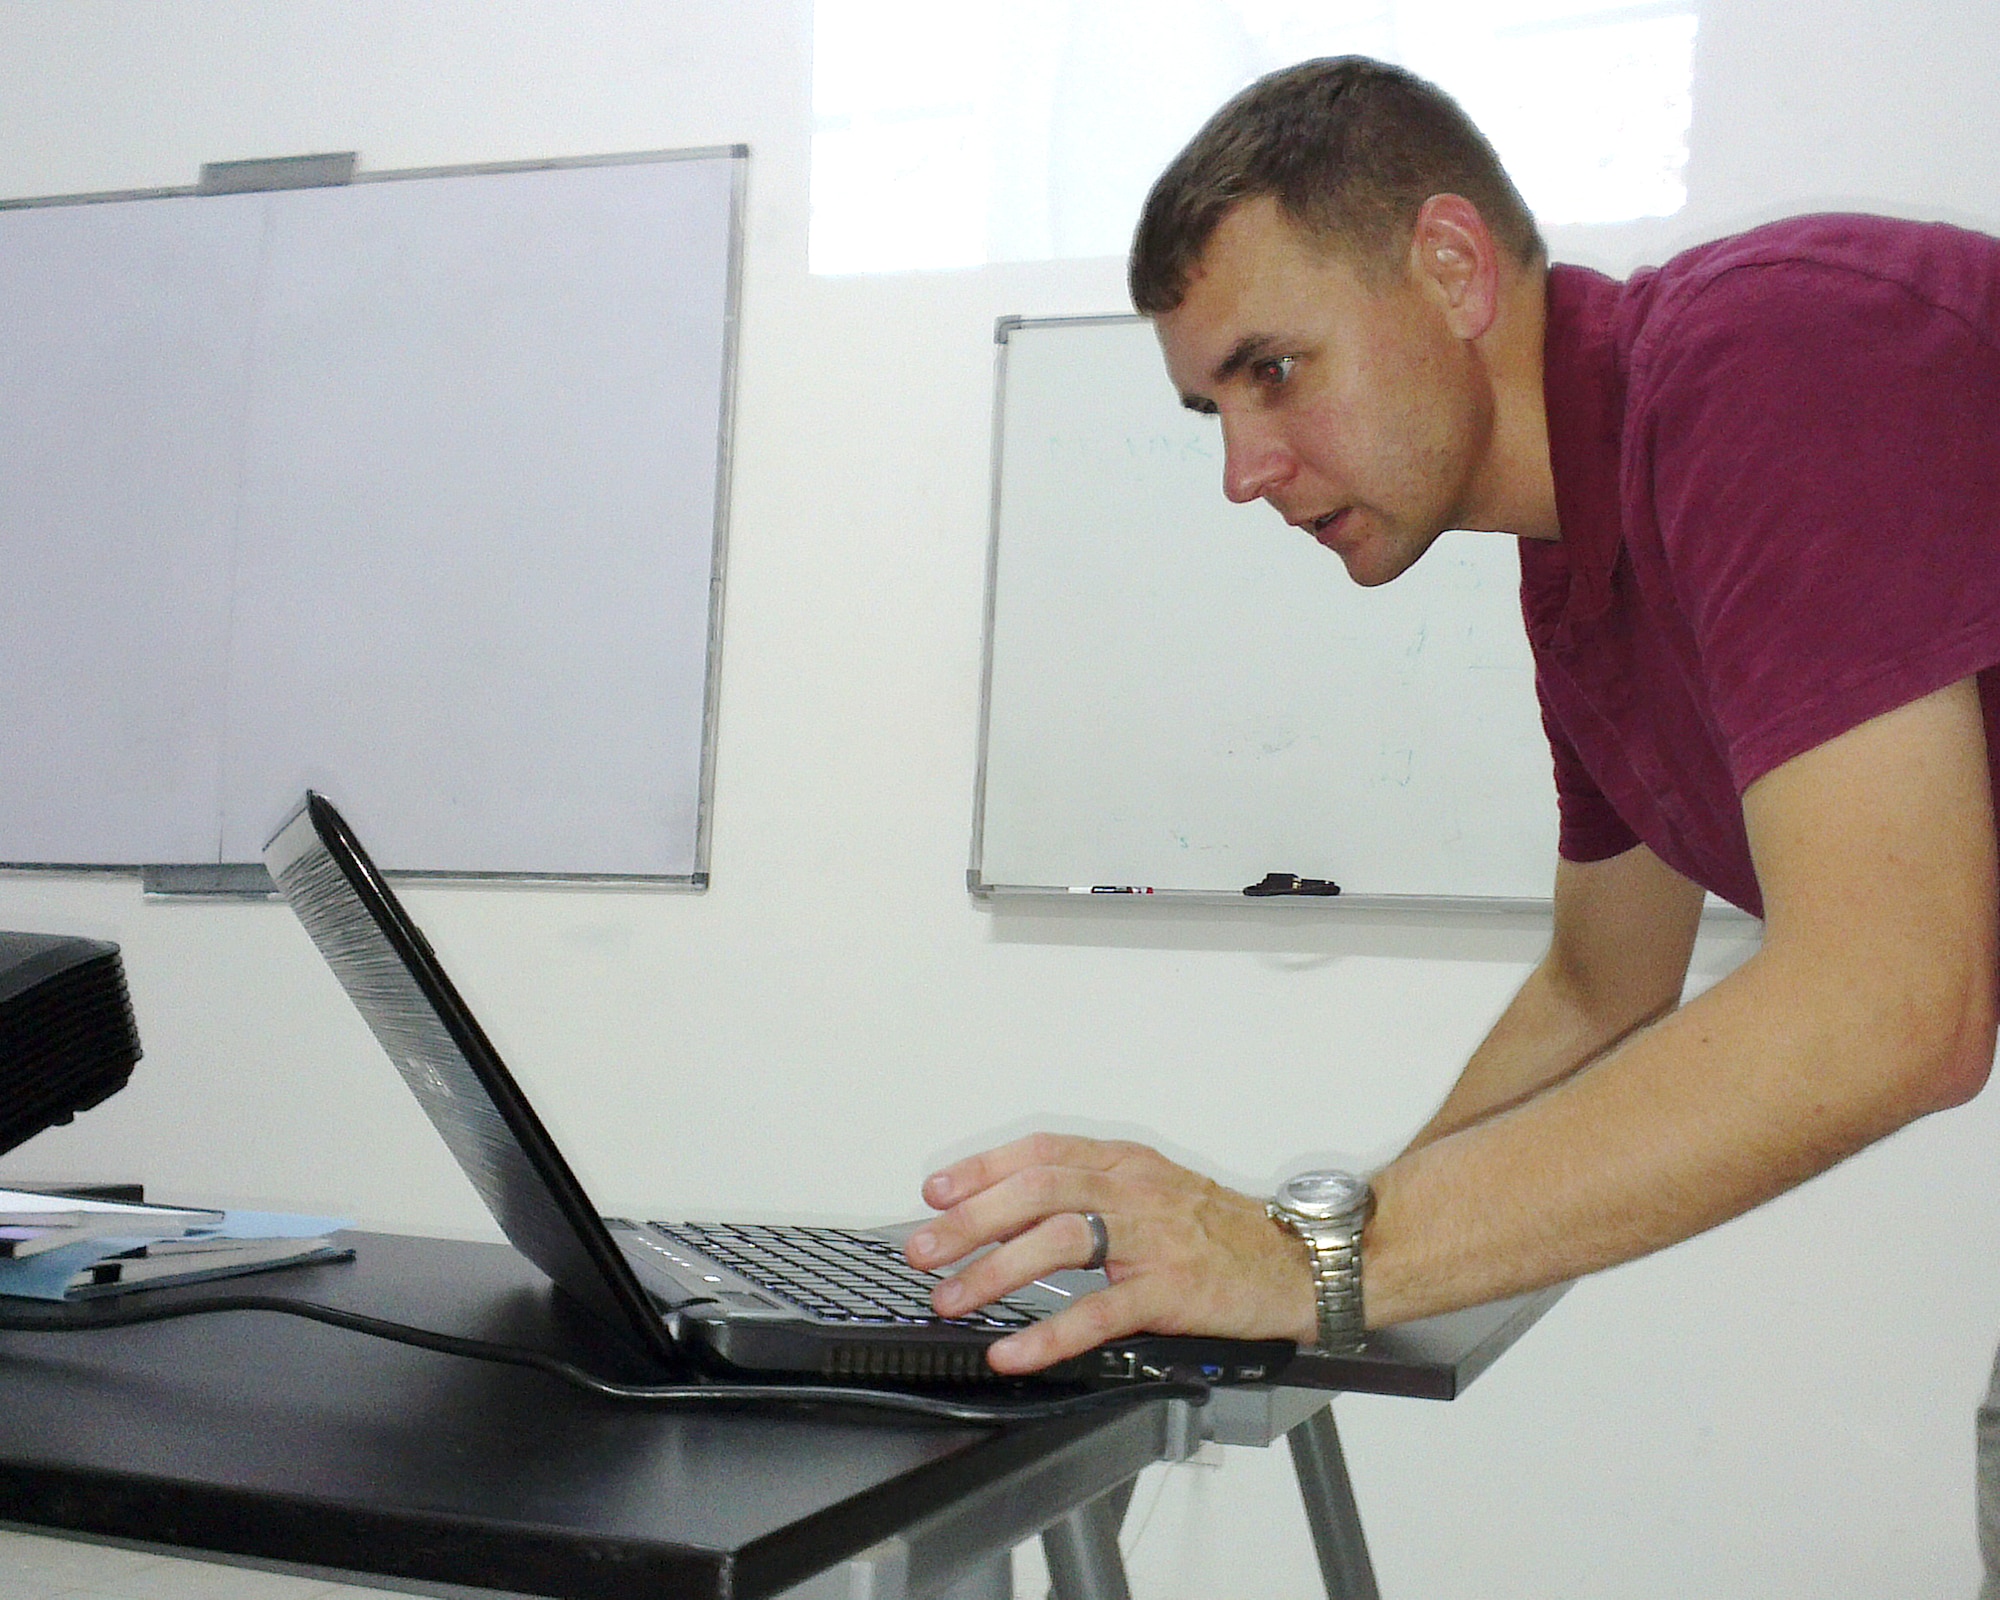 U.S. Air Force Maj. Steve Payne, Intelligence, Surveillance, Reconnaissance mission planning instructor from U.S. Air Forces in Europe and Air Forces Africa, tests his laptop for operations in Atar, Mauritania prior to starting a class where airmen from six African nations will learn about ISR mission planning during African Partnership Flight, Aug. 30, 2014. APF is the premier program for building aviation capacity, enhancing regional cooperation, and increasing U.S. and African interoperability. (U.S. Air Force photo/Master Sgt. Brian Boisvert/Released)